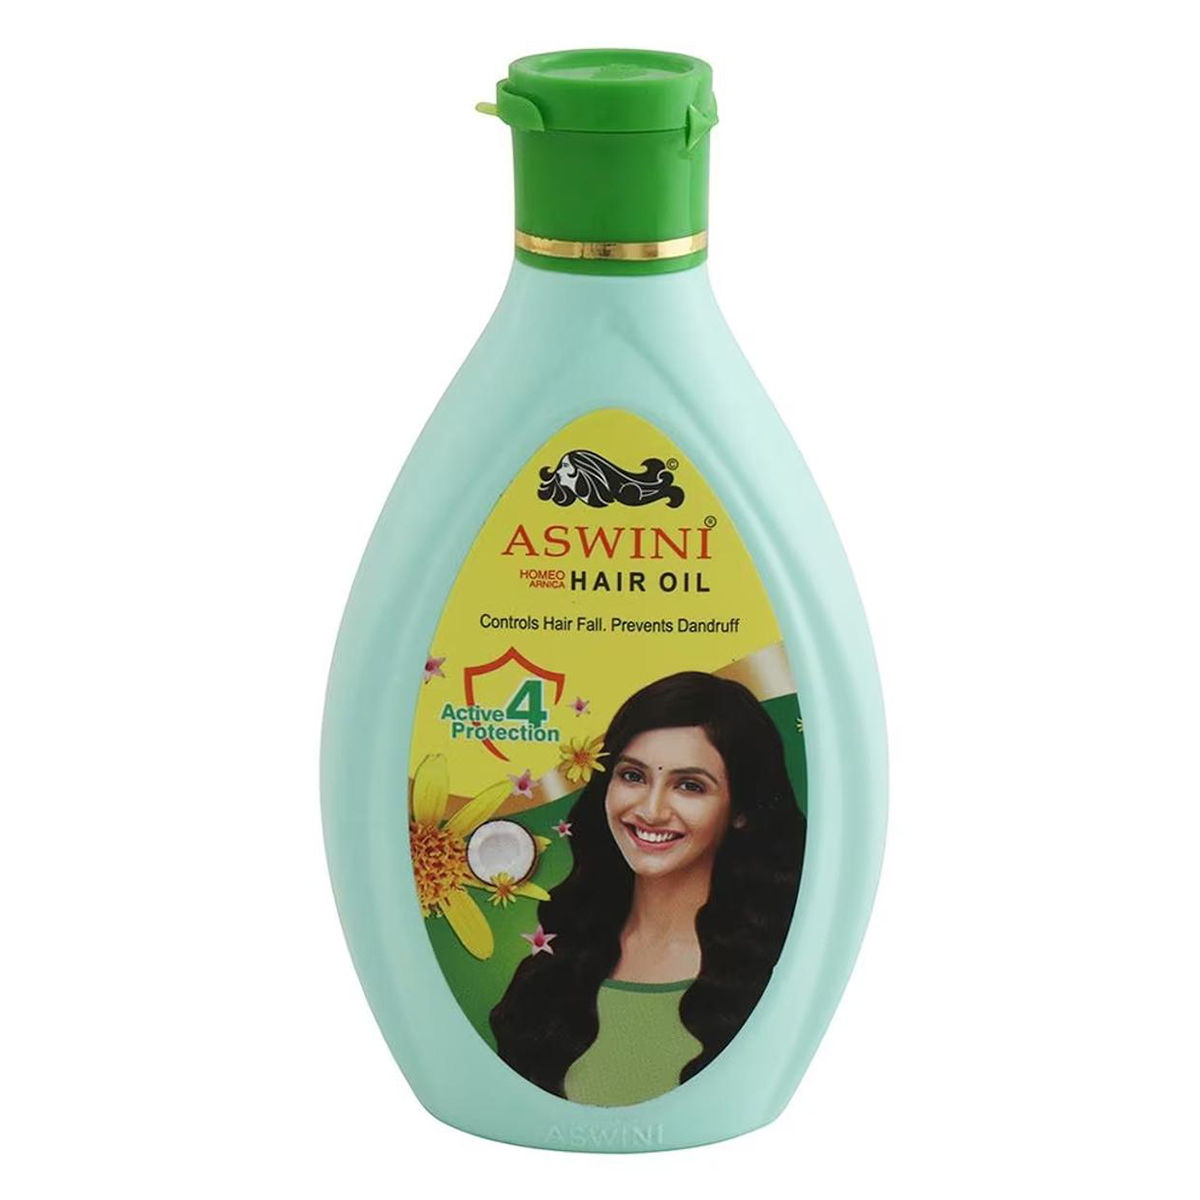 Buy aswini hair oil 360 ml Online at Low Prices in India - Amazon.in